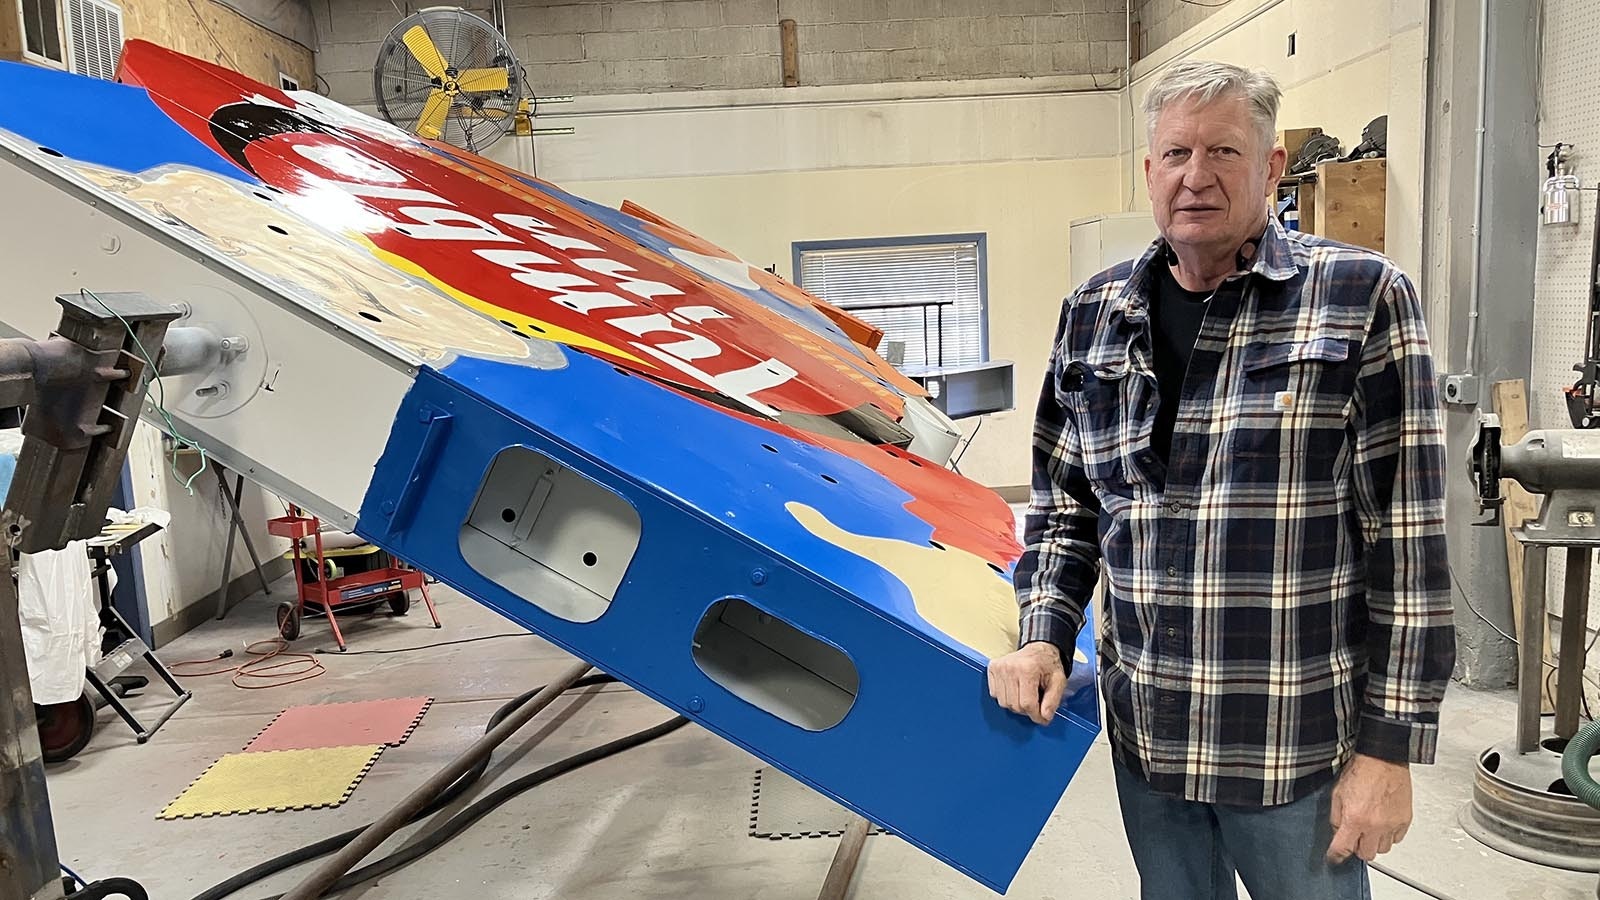 John Huff, an expert at restoring muscle cars, is leading the body work on the Tumble Inn sign. He has spent the past four months dedicated to the project.